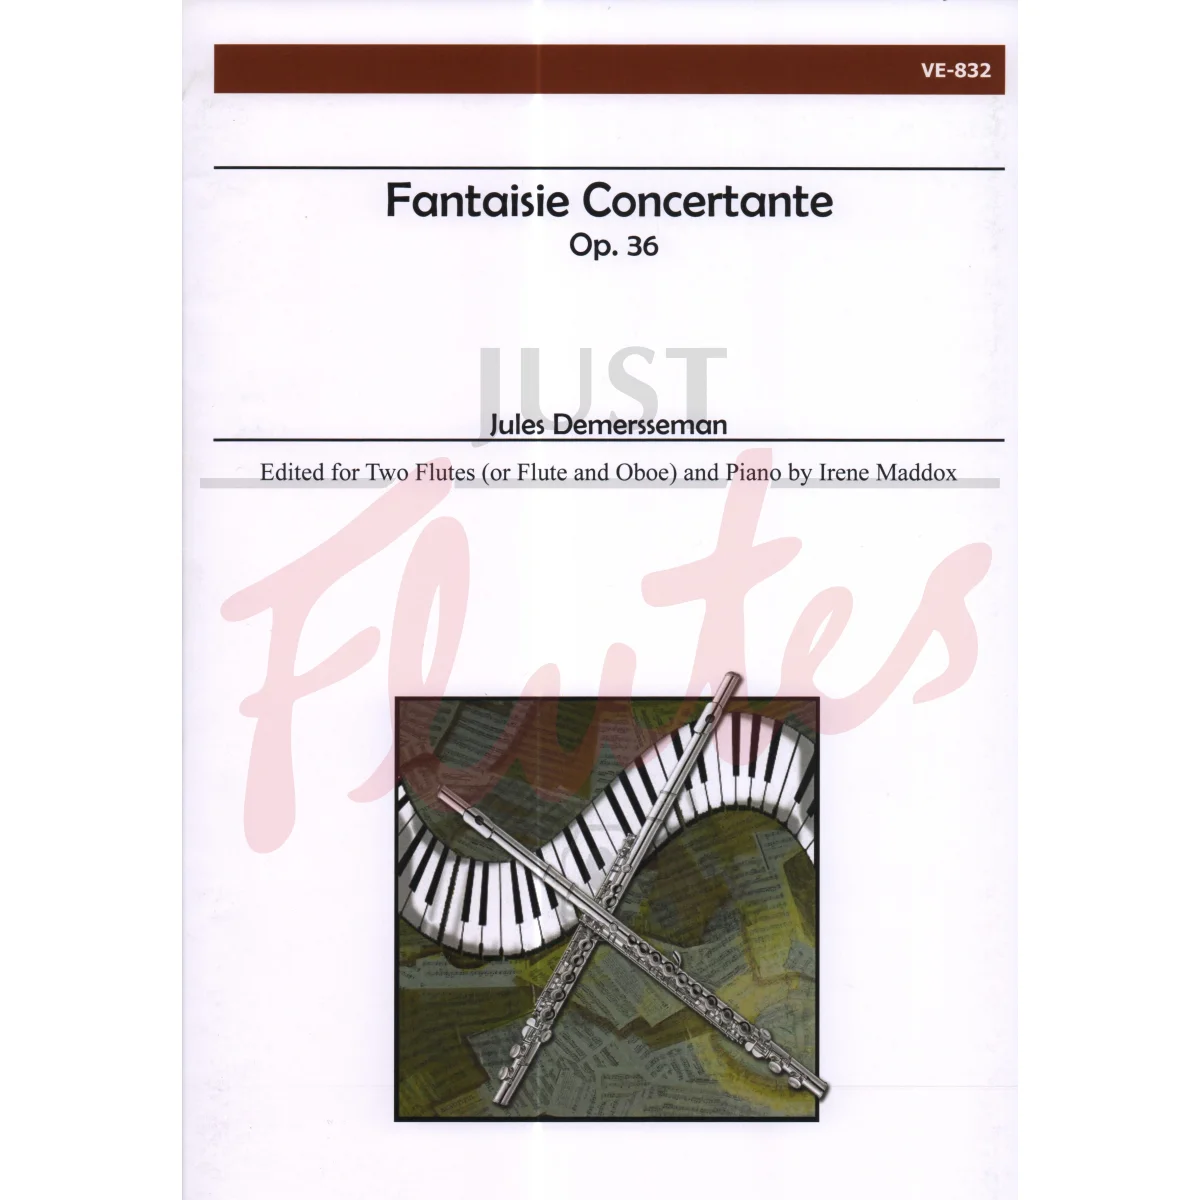 Fantaisie Concertante for Two Flutes and Piano